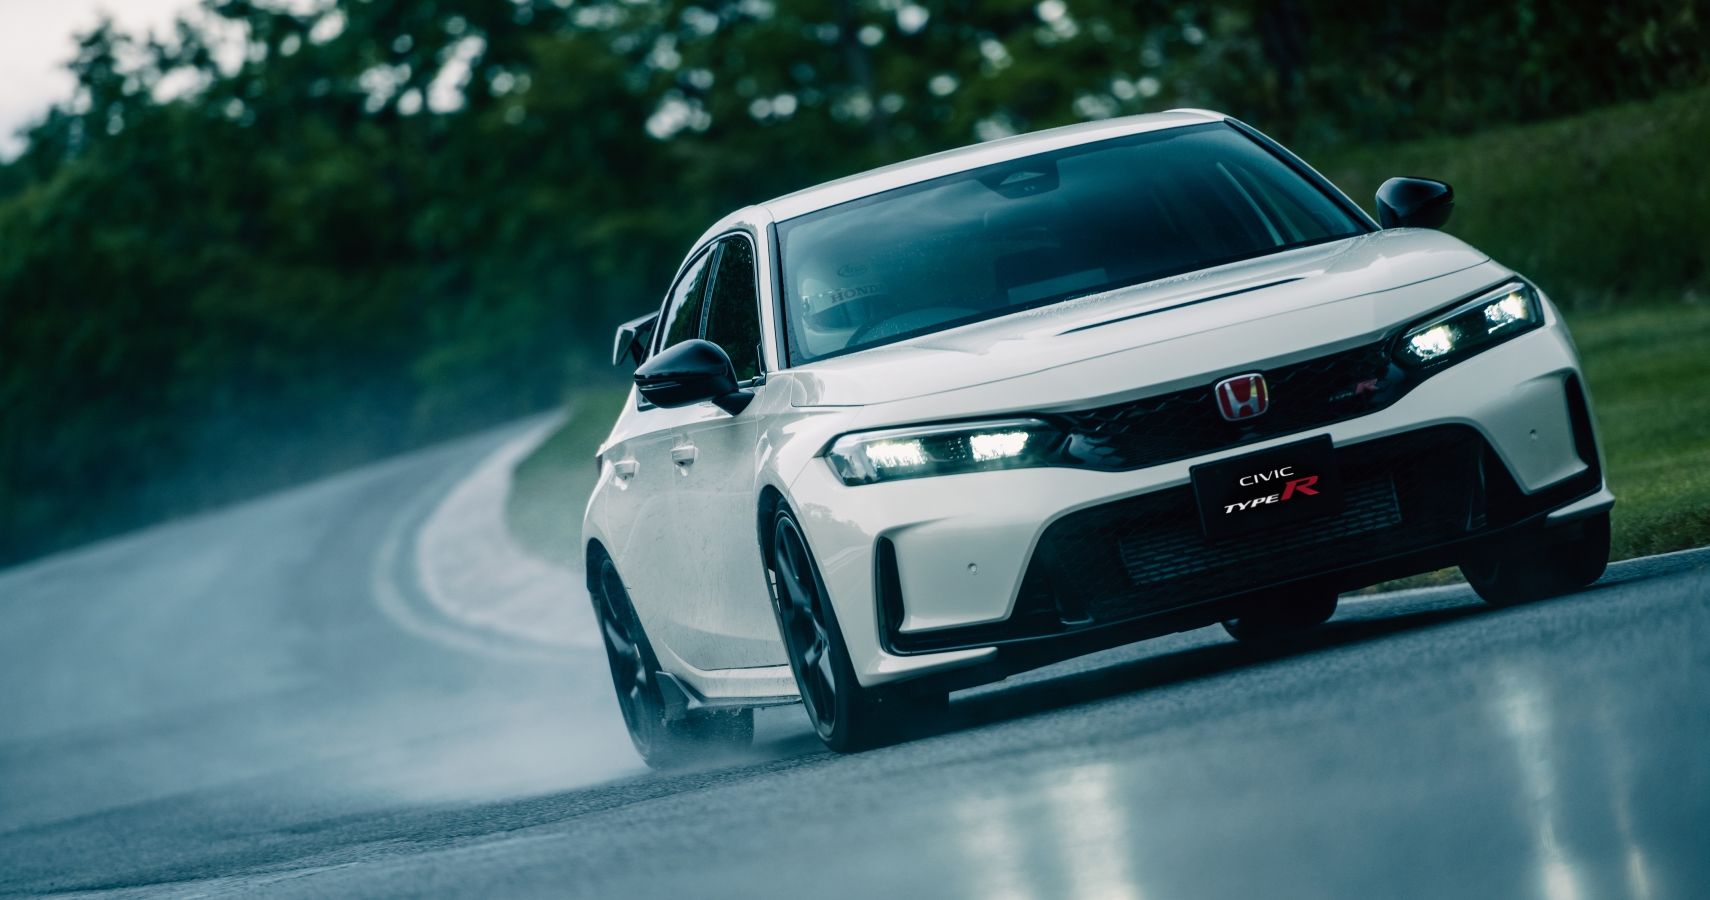 2023 Civic Type R On Race Track In The Wet